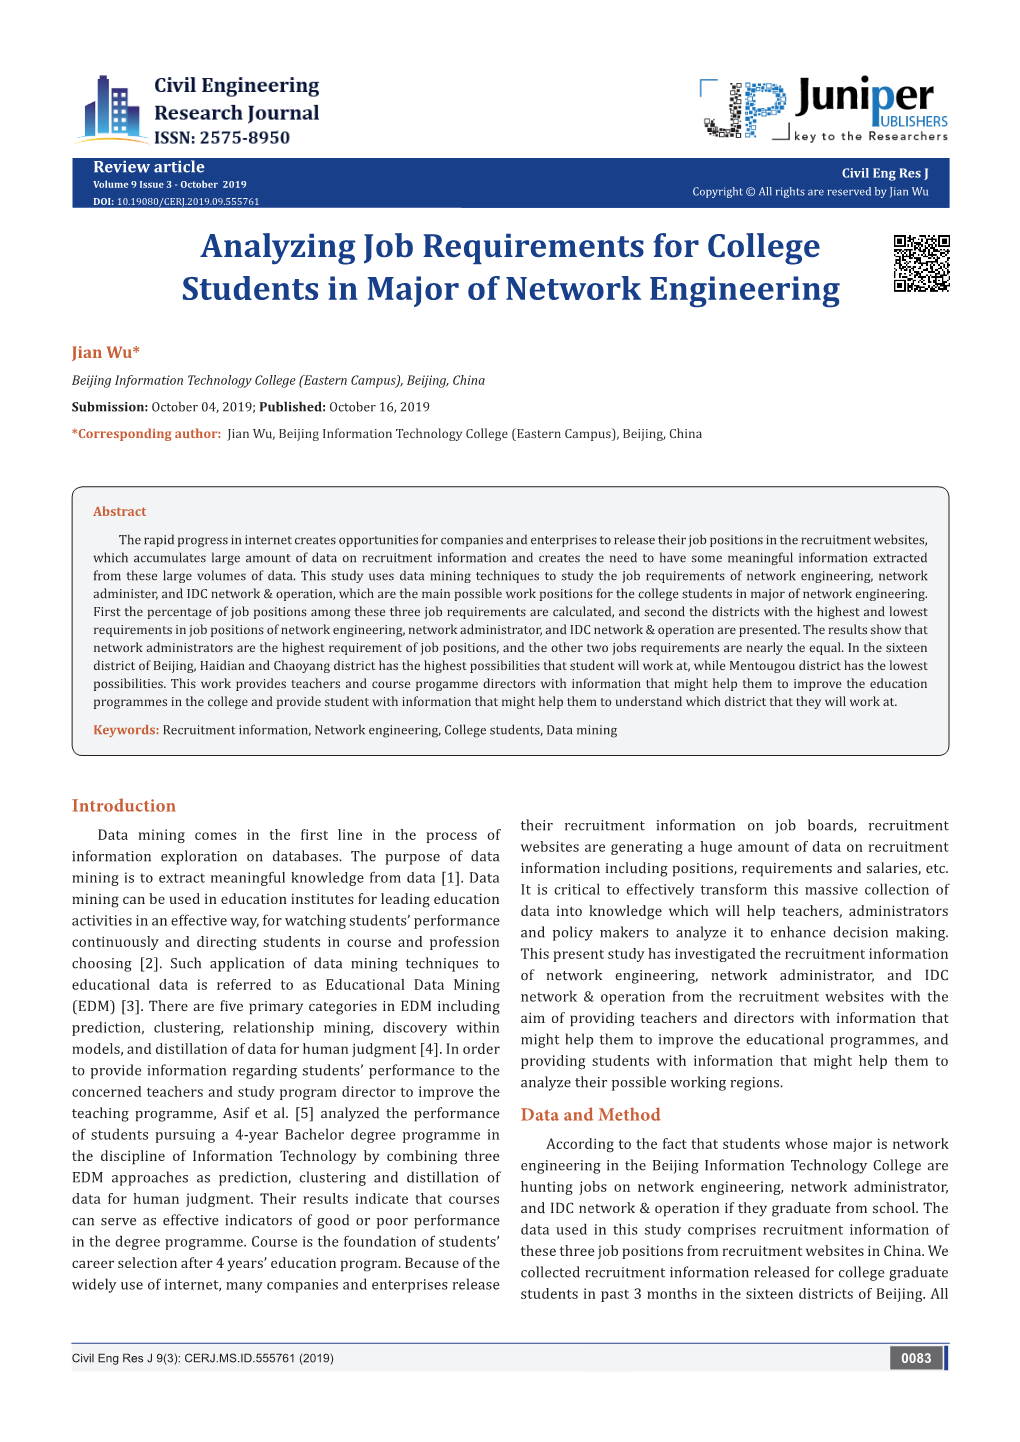 Analyzing Job Requirements for College Students in Major of Network Engineering